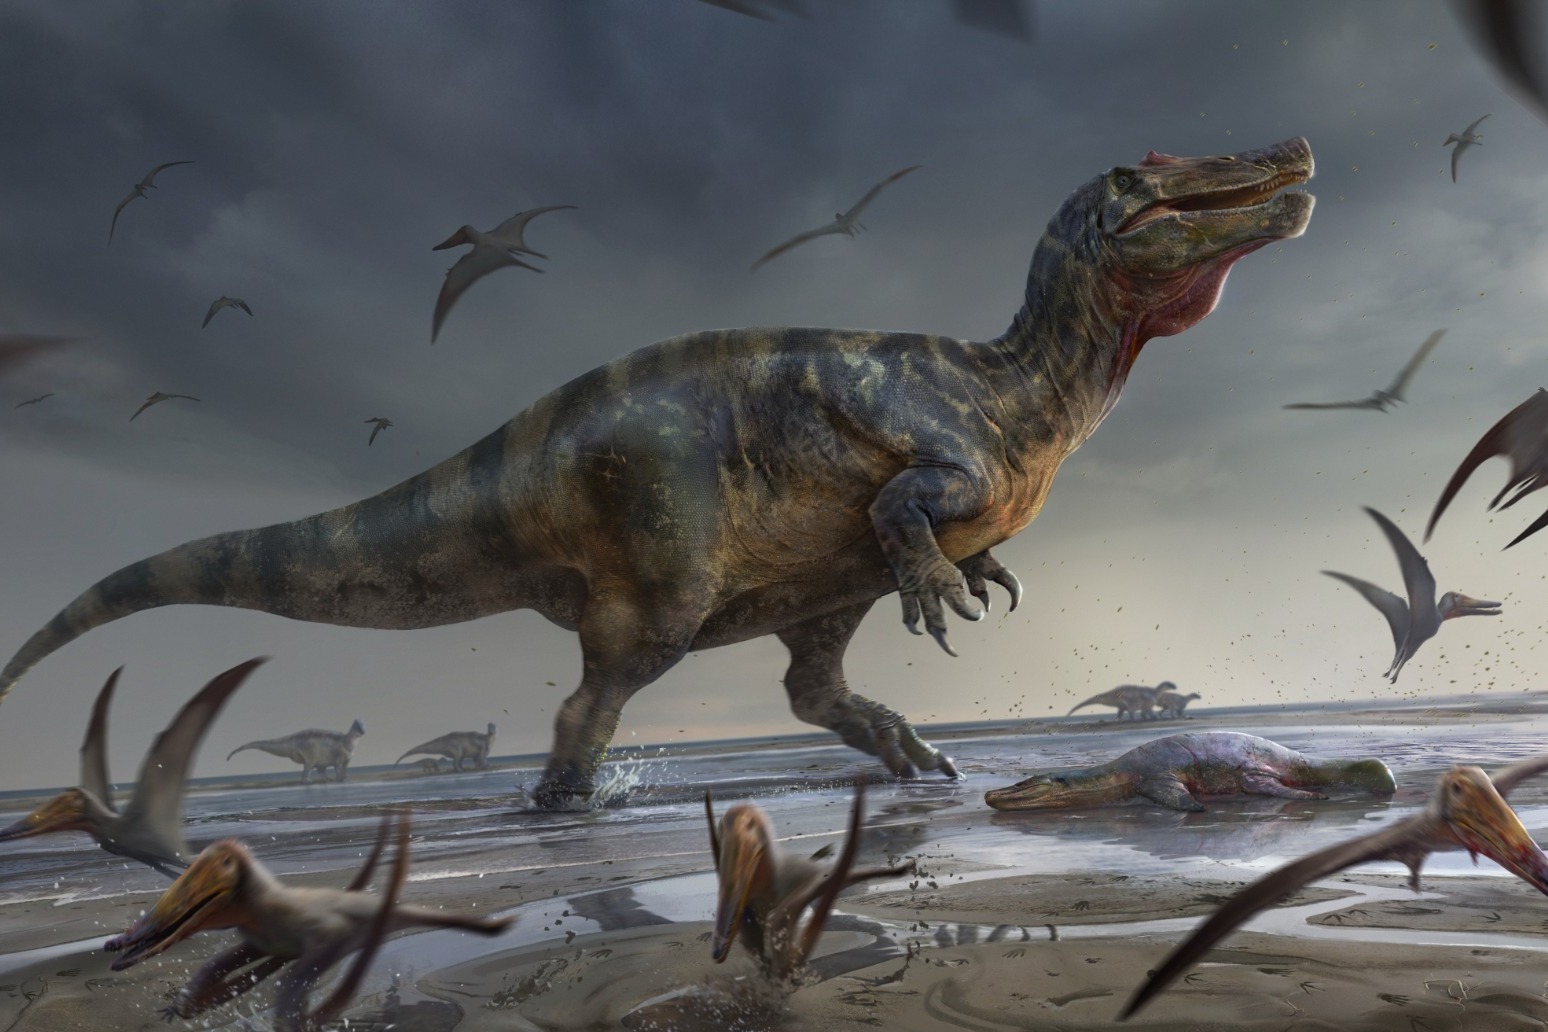 Remains of Europes largest ever land predator dinosaur found on Isle of Wight